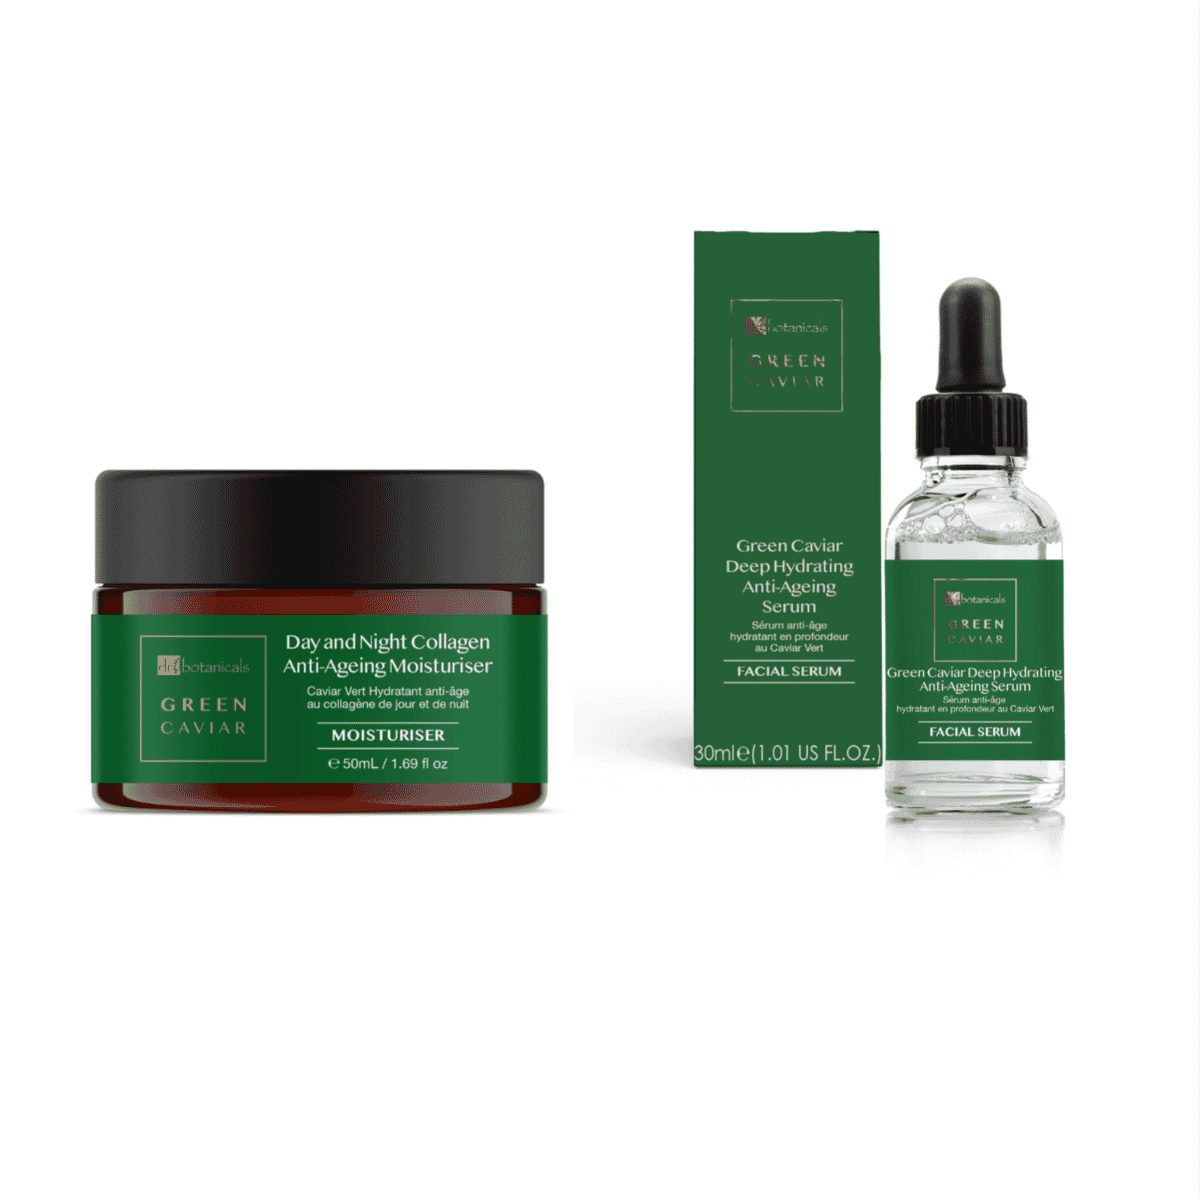 Dr Botanicals Green Caviar Collection- Anti-Ageing Day and Night Moisturizer (1.69oz) & Facial Serum (1.01oz) image number 0